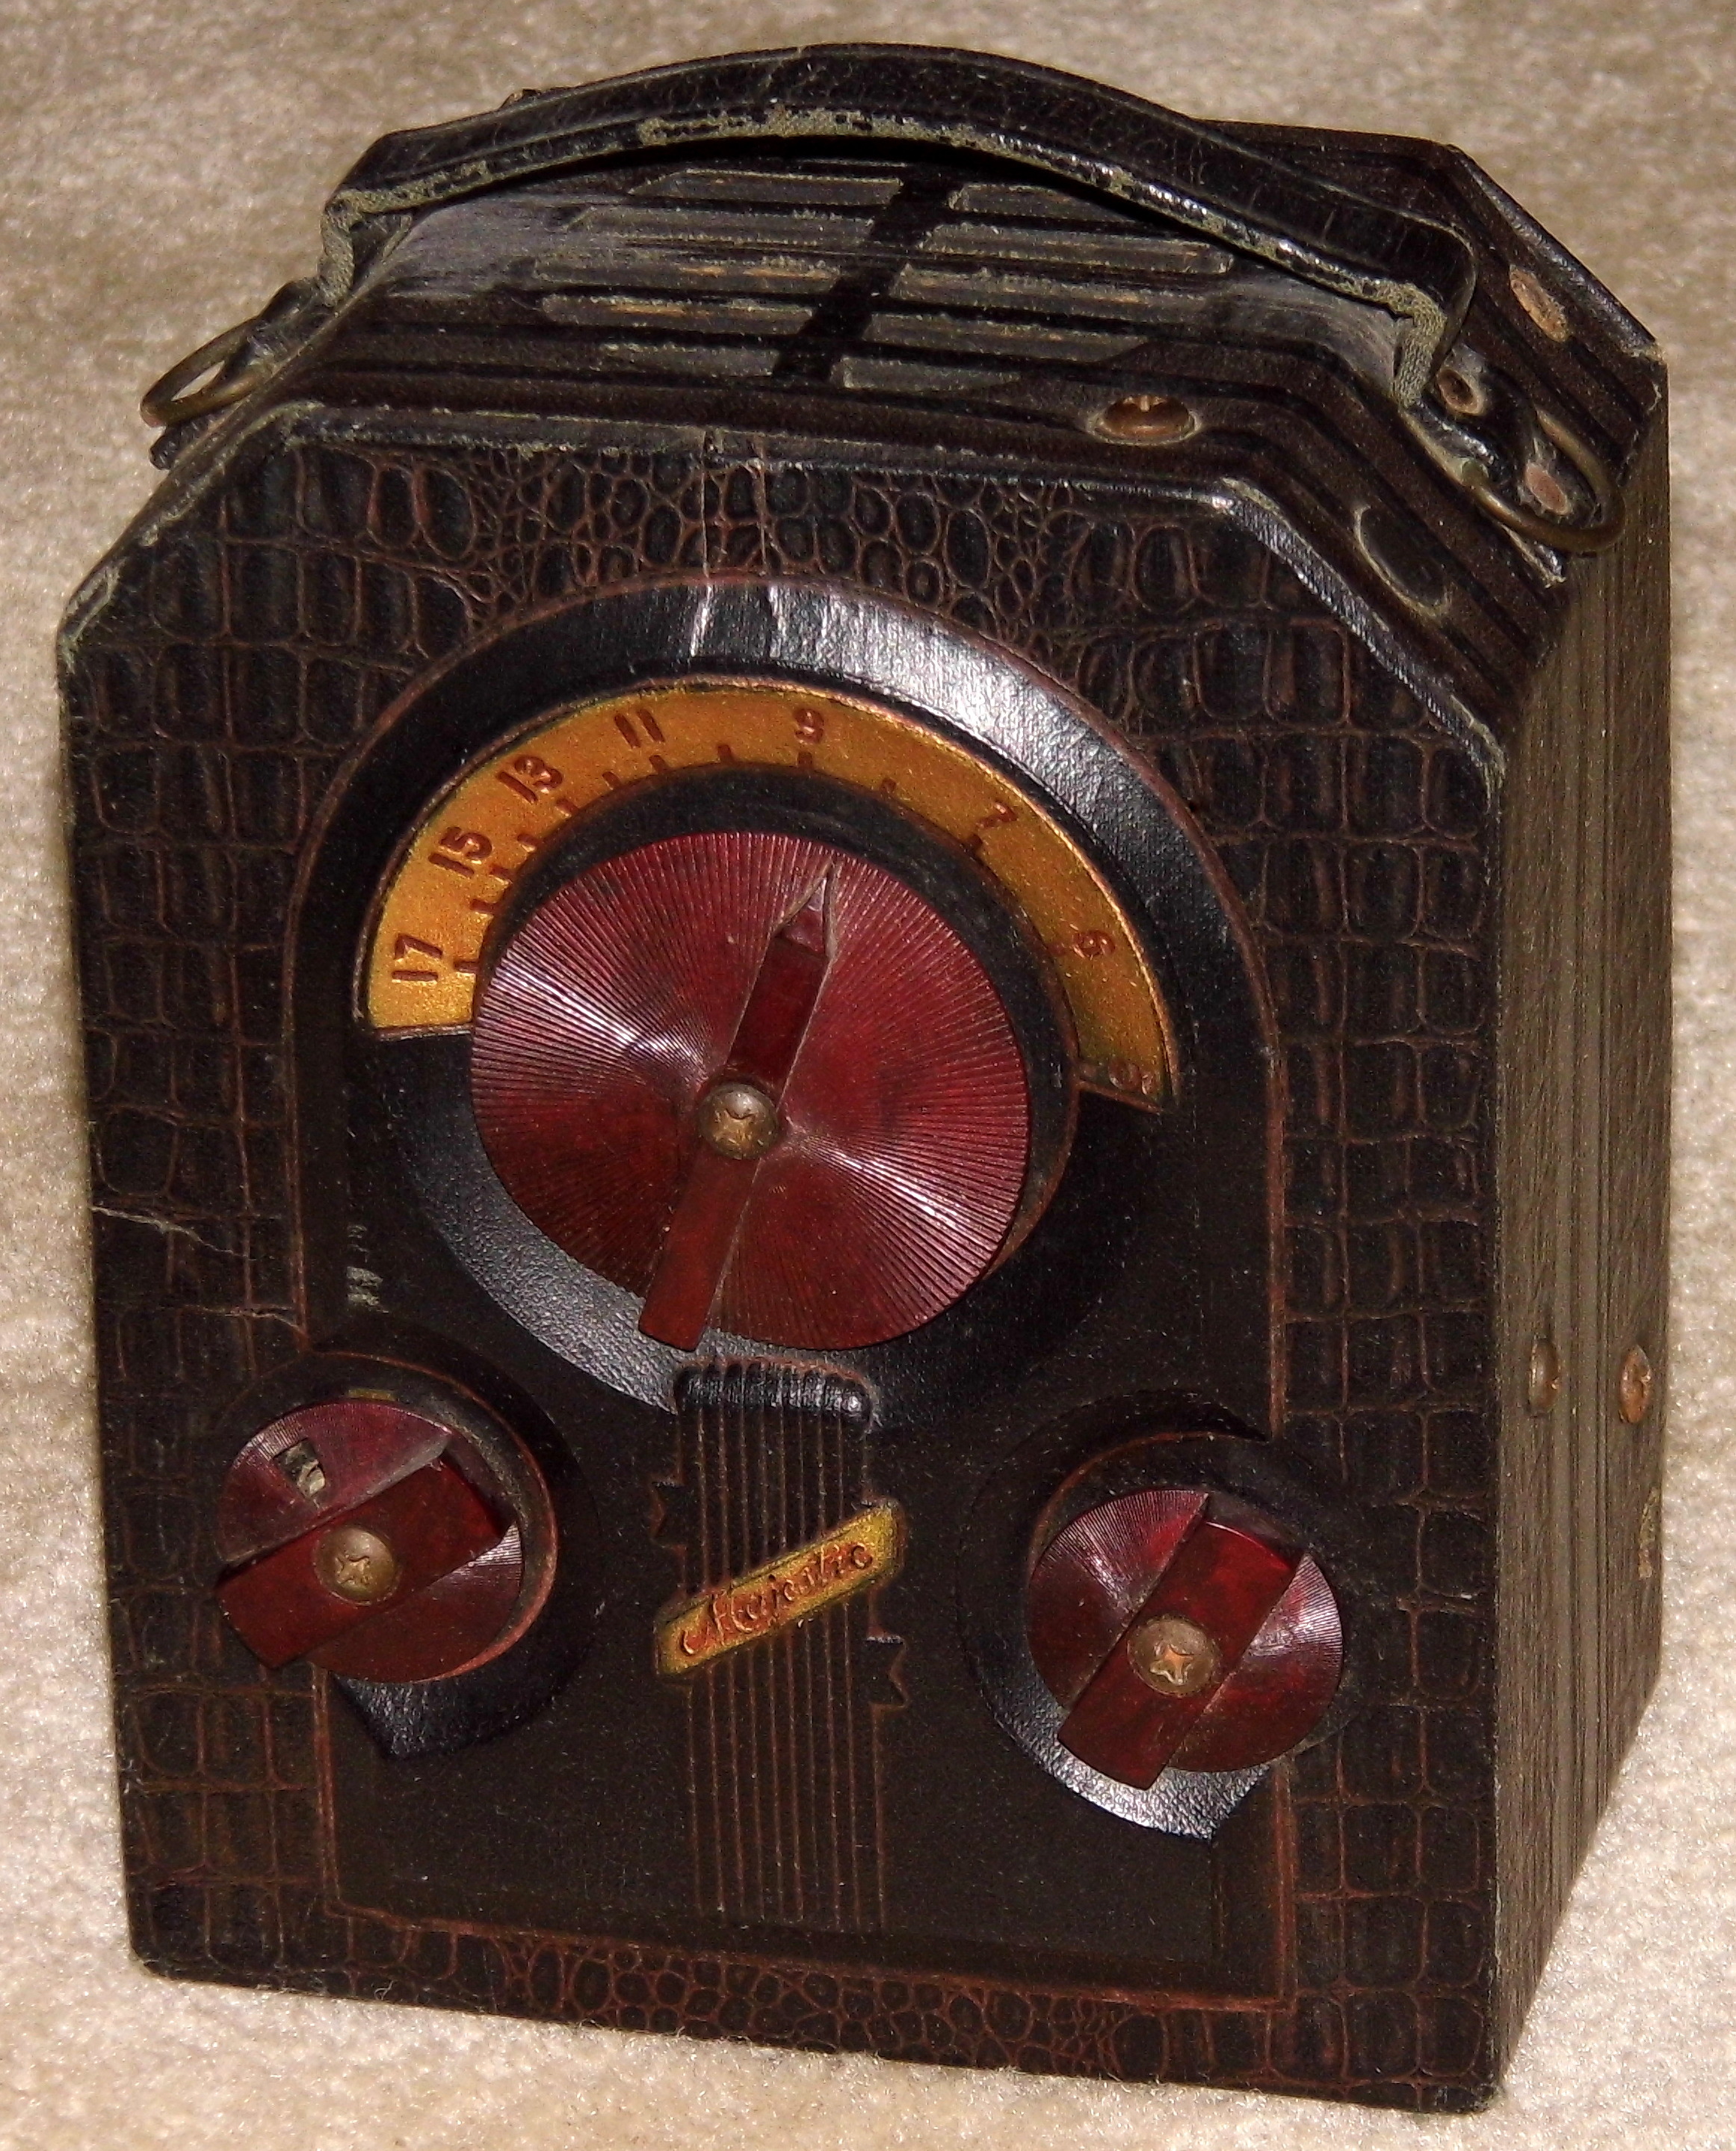 Vintage Majestic Camera-Style Portable Radio, Model 130, Broadcast Band Only (MW), 3 Tubes, Battery Powered, Made In USA, Circa 1939 (14701105659)